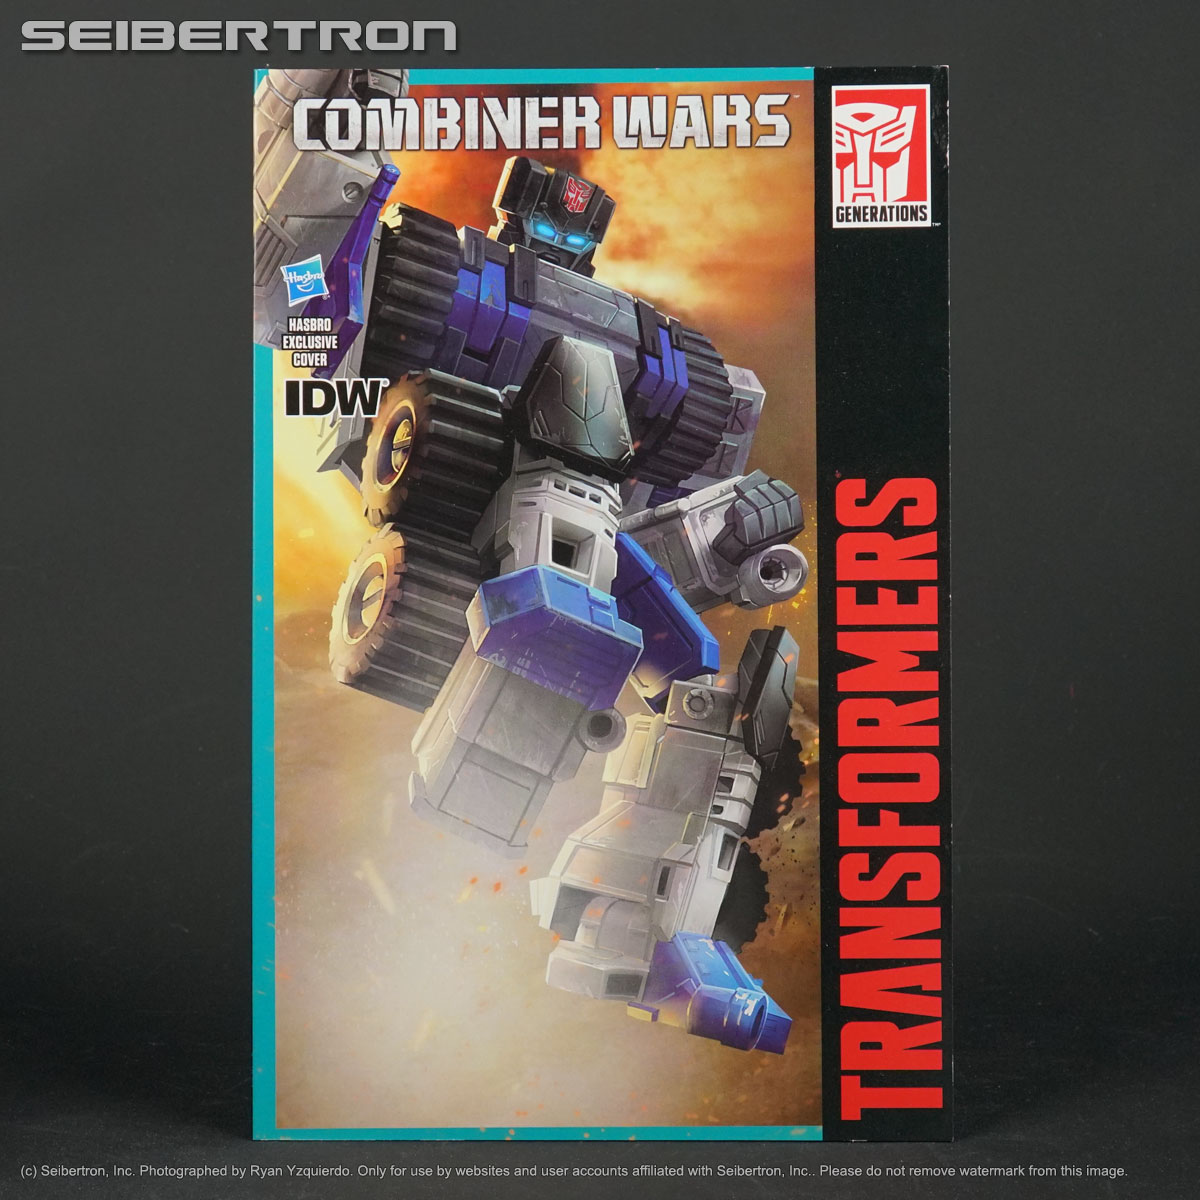 Protectobot ROOK Transformers Generations Combiner Wars IDW pack-in comic book